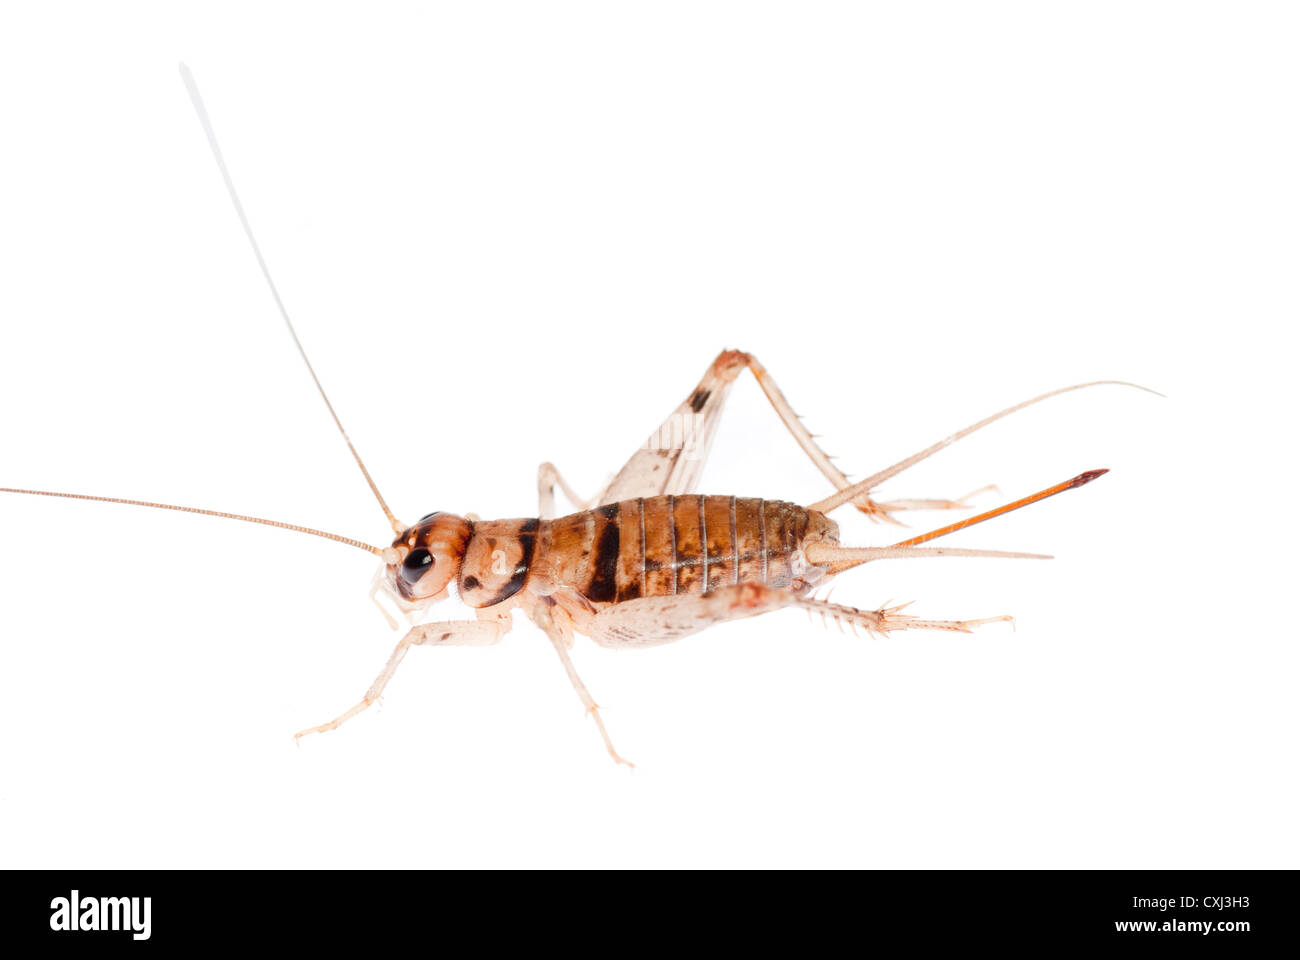 insect cricket Stock Photo